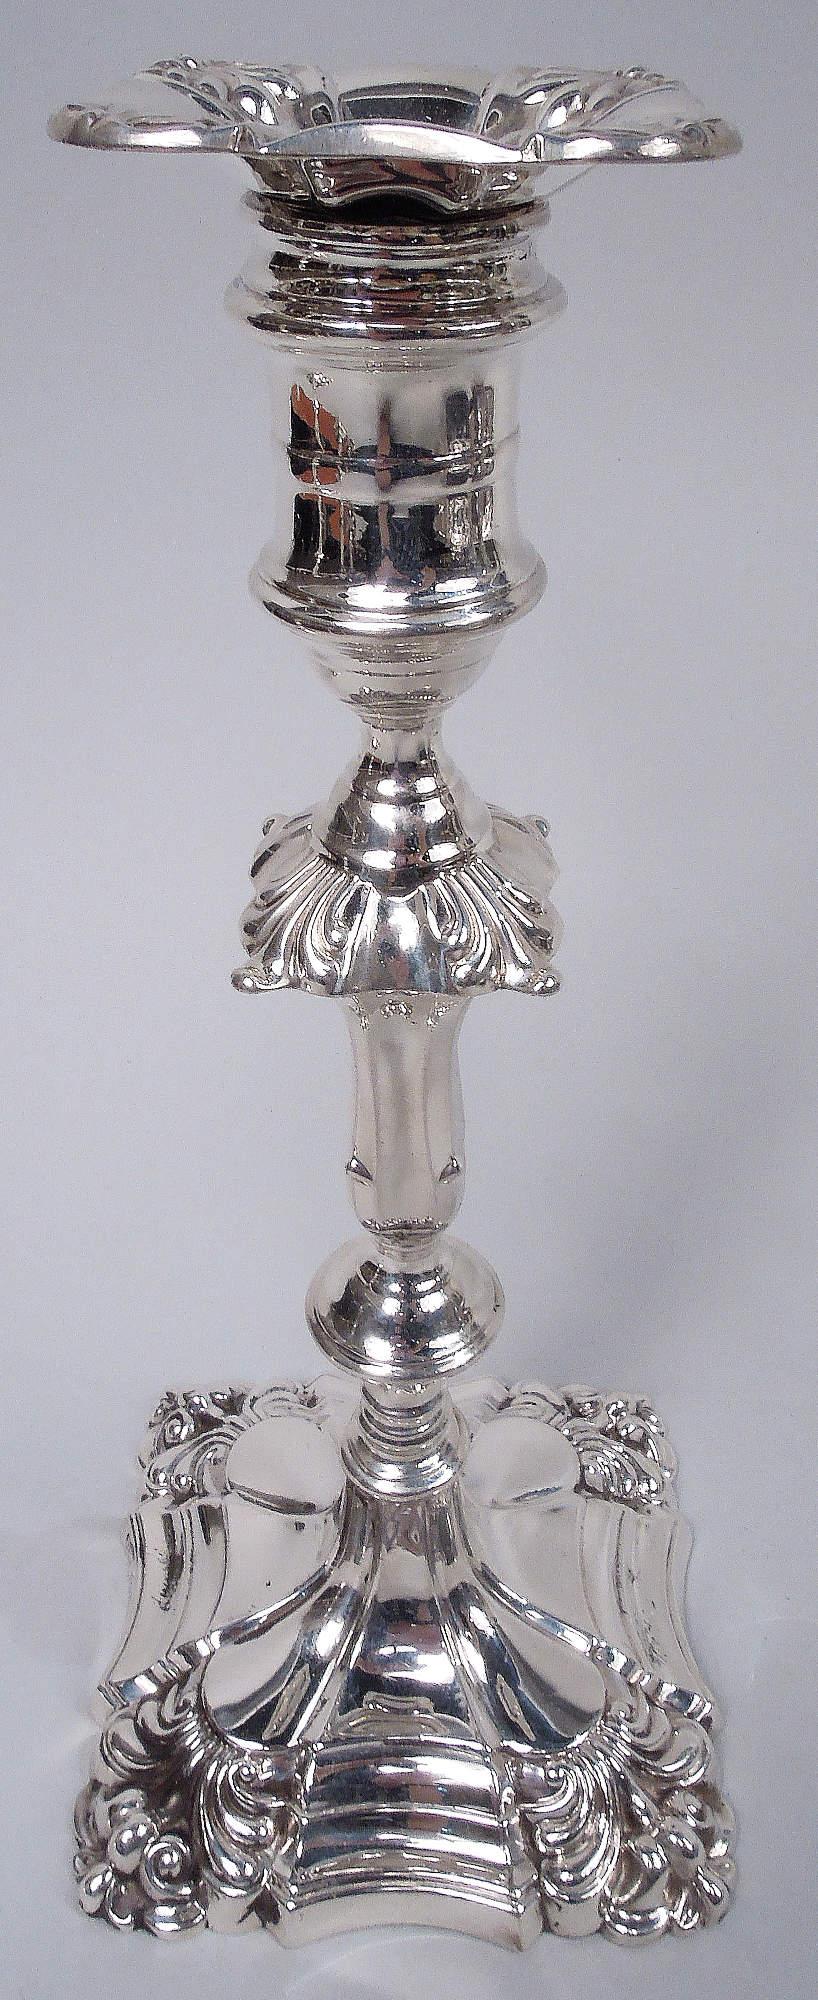 Pair of Edwardian Georgian sterling silver candlesticks. Made by Munsey & Co. in Cambridge in 1903. Each: Banded spool socket with detachable concave square bobeche; flanged and knopped shaft on raised and stepped concave square foot with scrolling